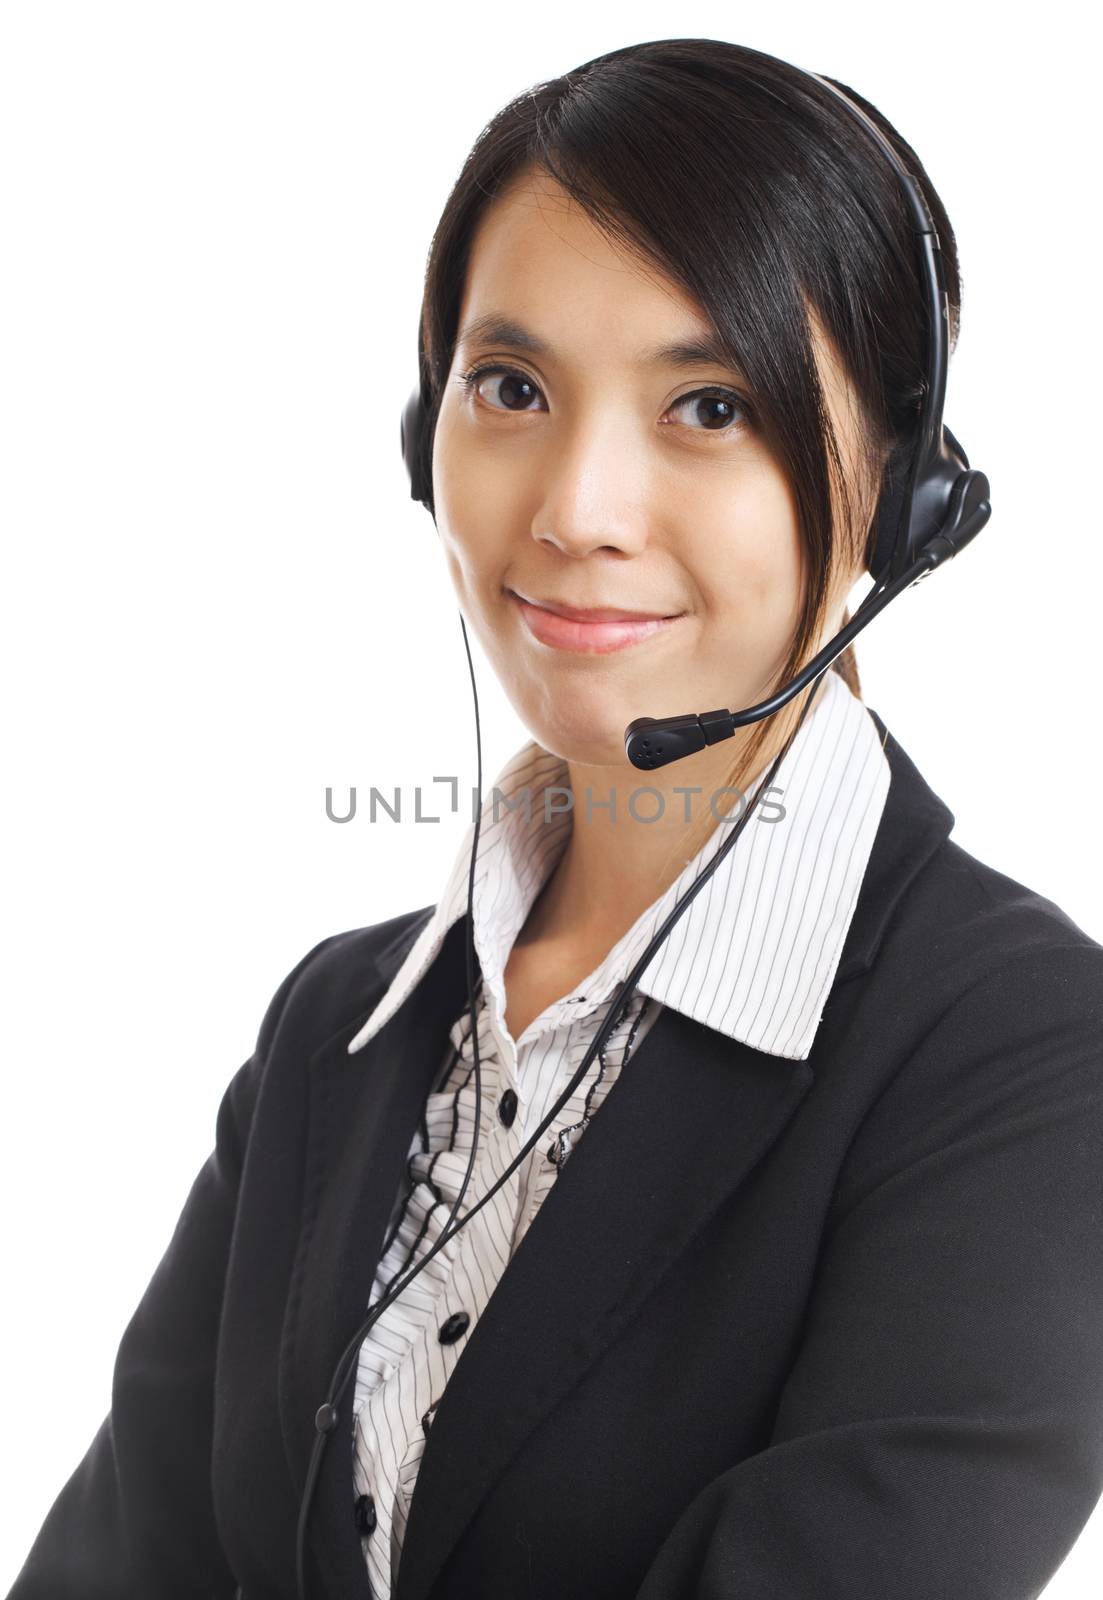 Call center business woman with headset by leungchopan